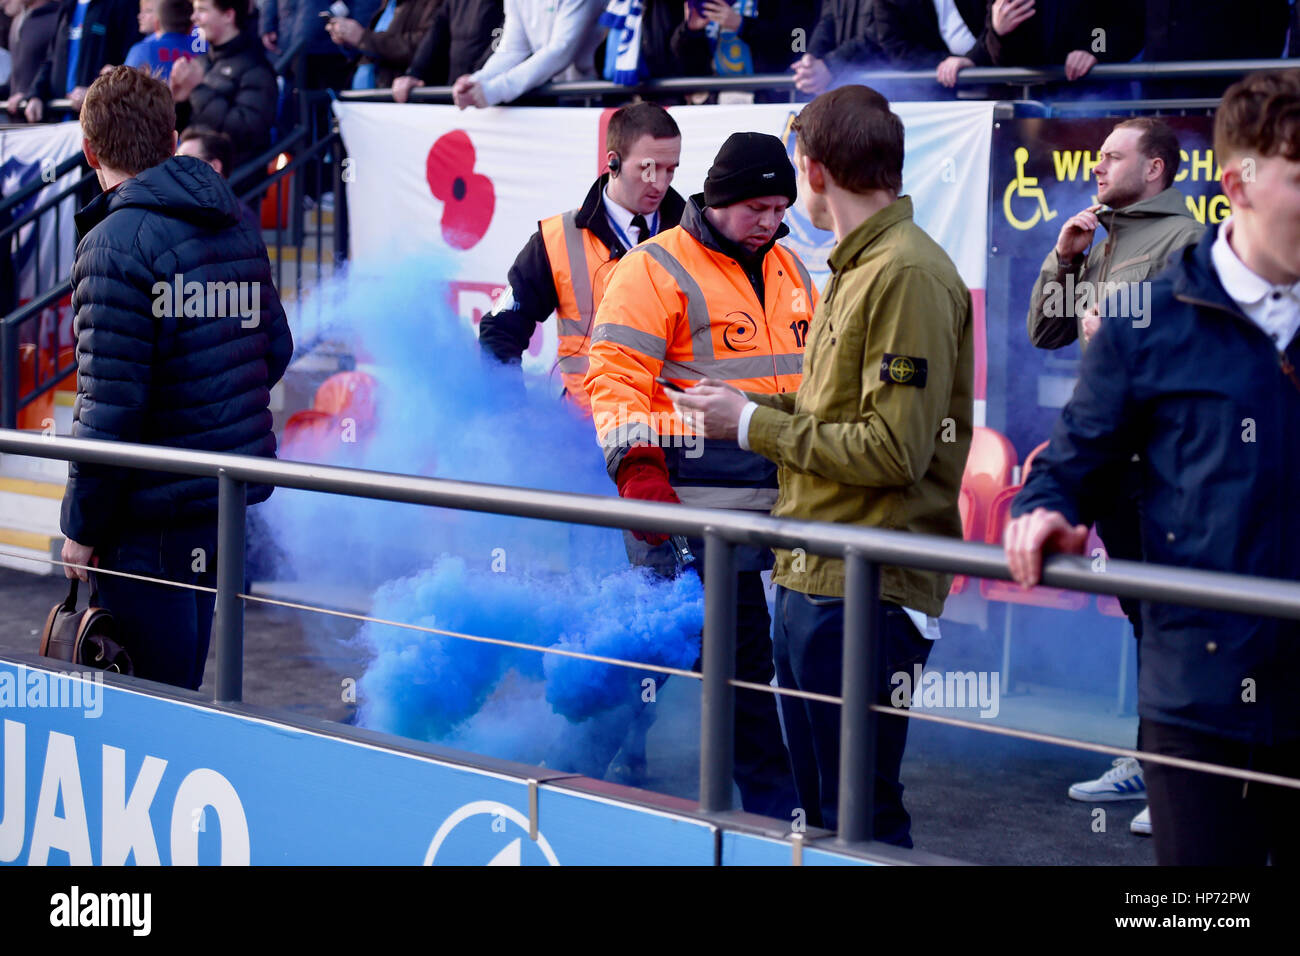 Stewards remove a blue flare thrown after Portsmaouth had scored during the Sky Bet League 2 match between Barnet and Portsmouth at The Hive Stadium in London. February 18, 2017. Editorial use only. No merchandising. For Football images FA and Premier League restrictions apply inc. no internet/mobile usage without FAPL license - for details contact Football Dataco Stock Photo